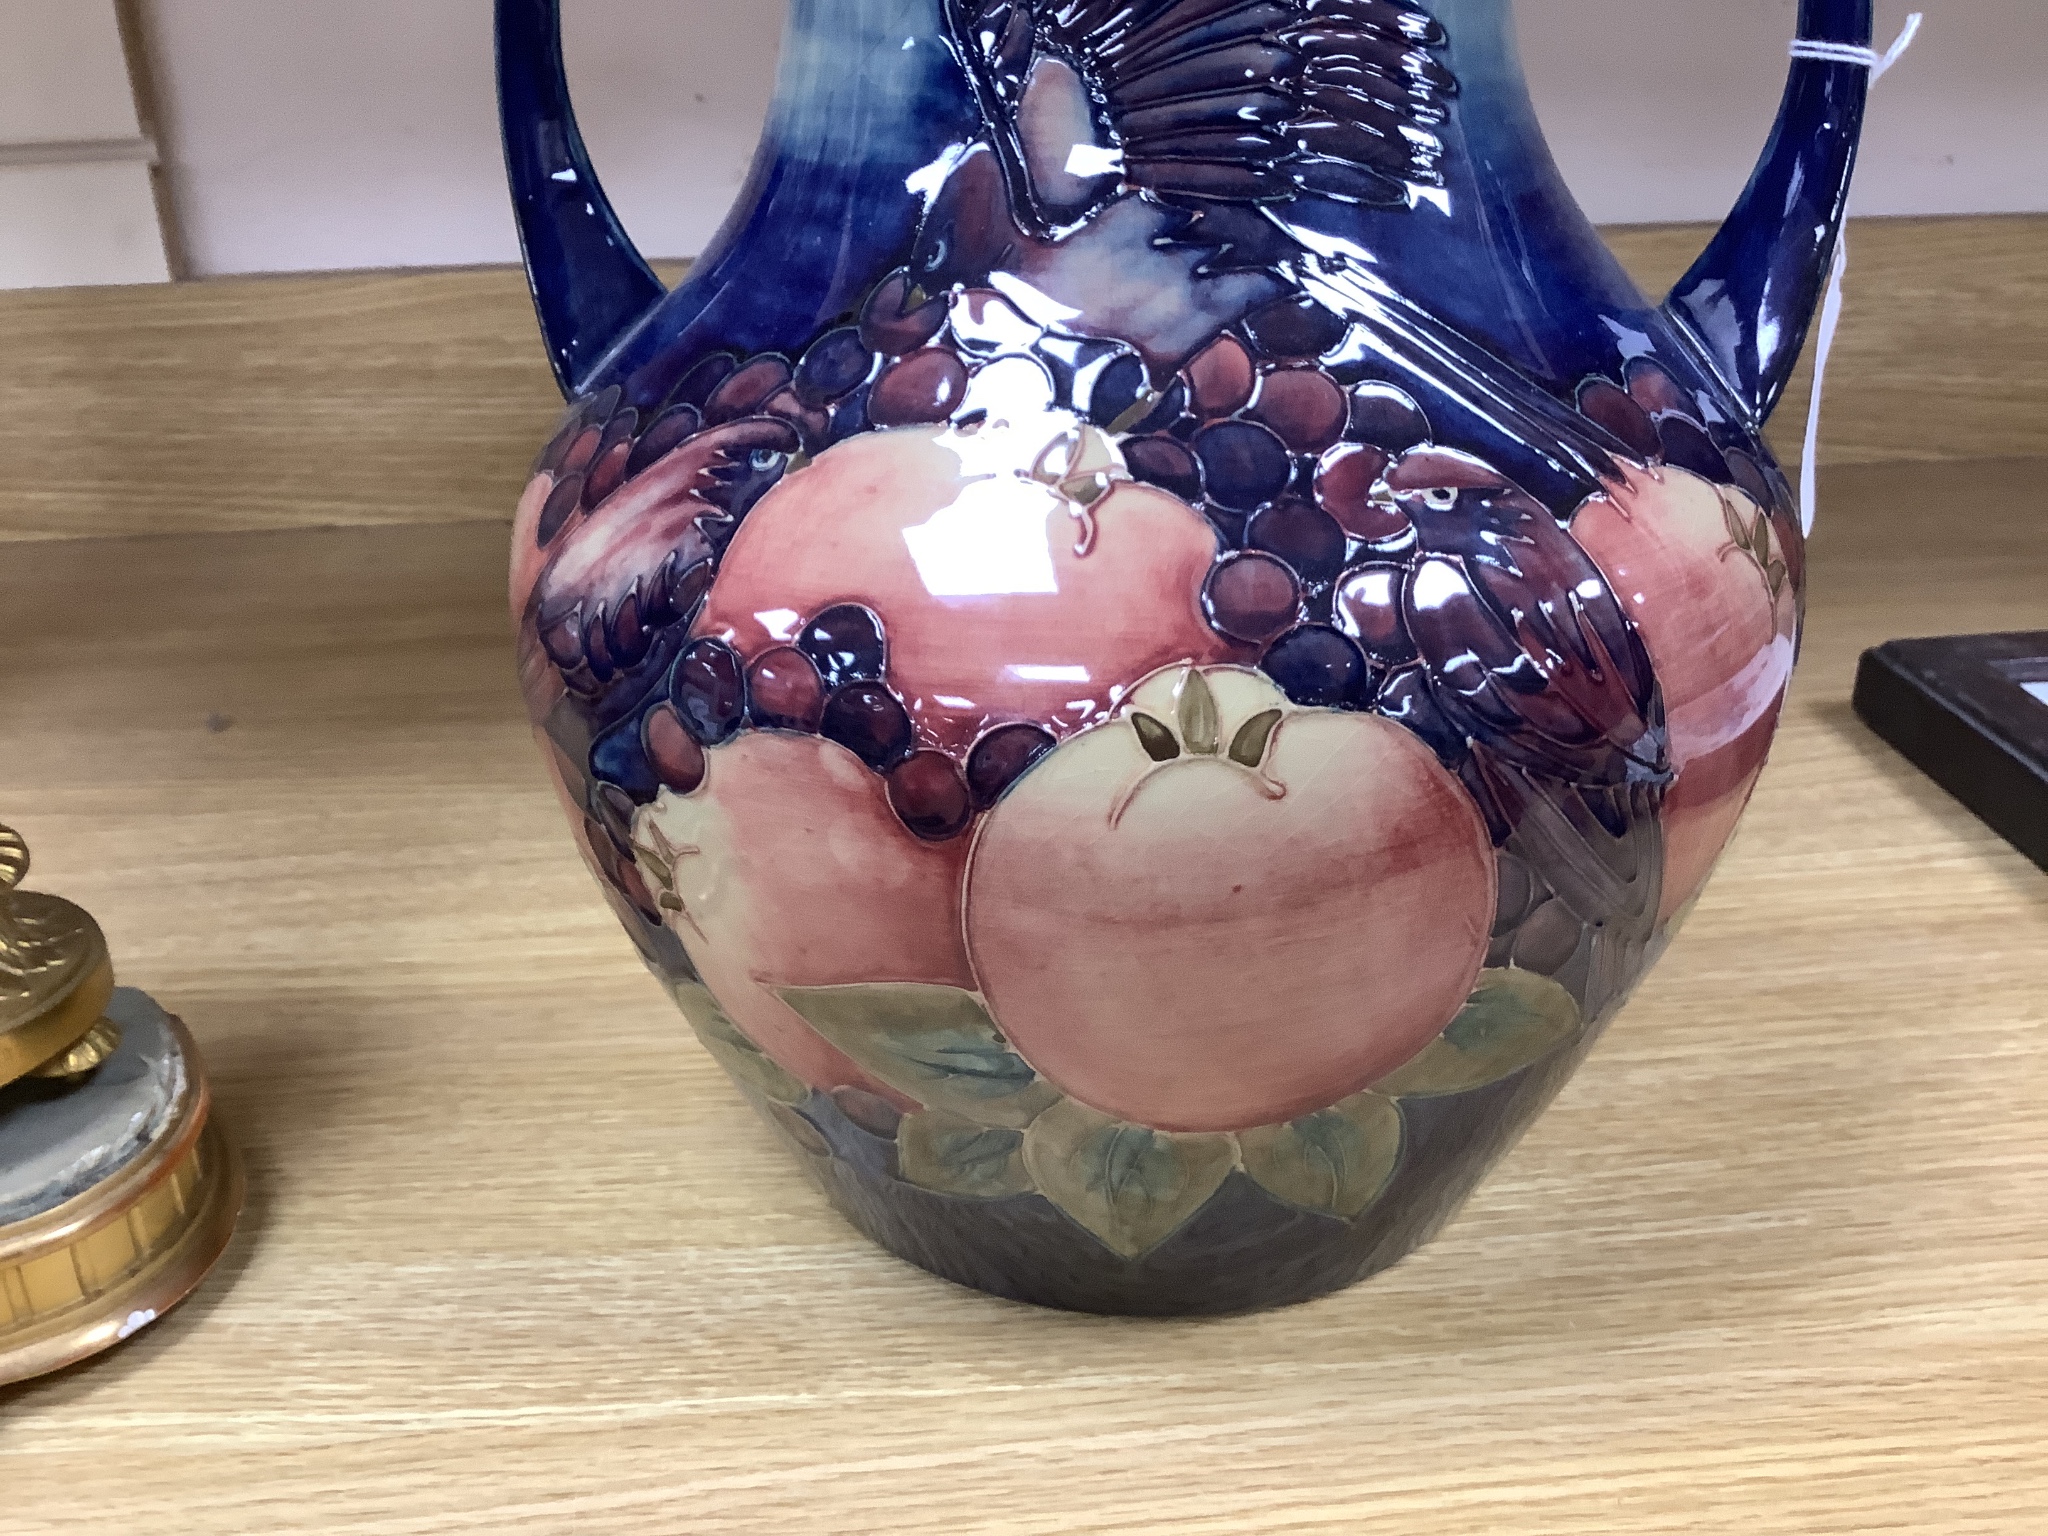 A large Moorcroft finches and fruit two handled vase, height 36cm